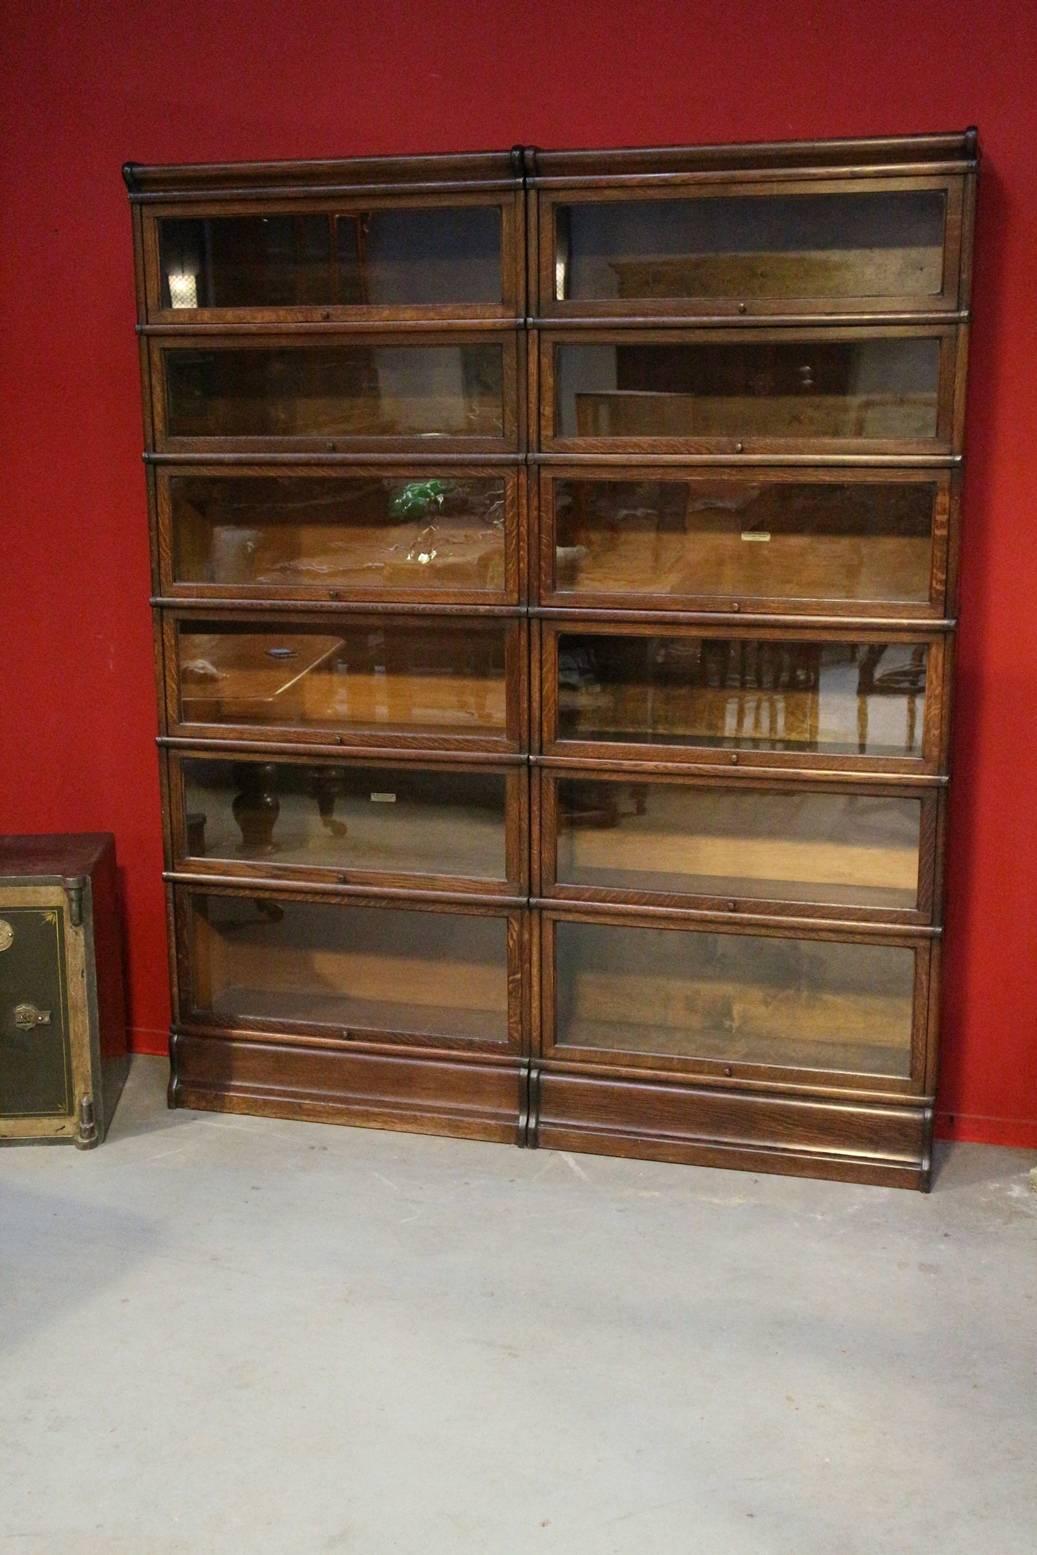 Antique oak globe Wernicke bookcase in very good condition.
The cabinet consists of two rows of six stackable parts.

Origin: England
Period: circa 1895-1910
Size: W 173cm, D 29cm, H 209cm.
 